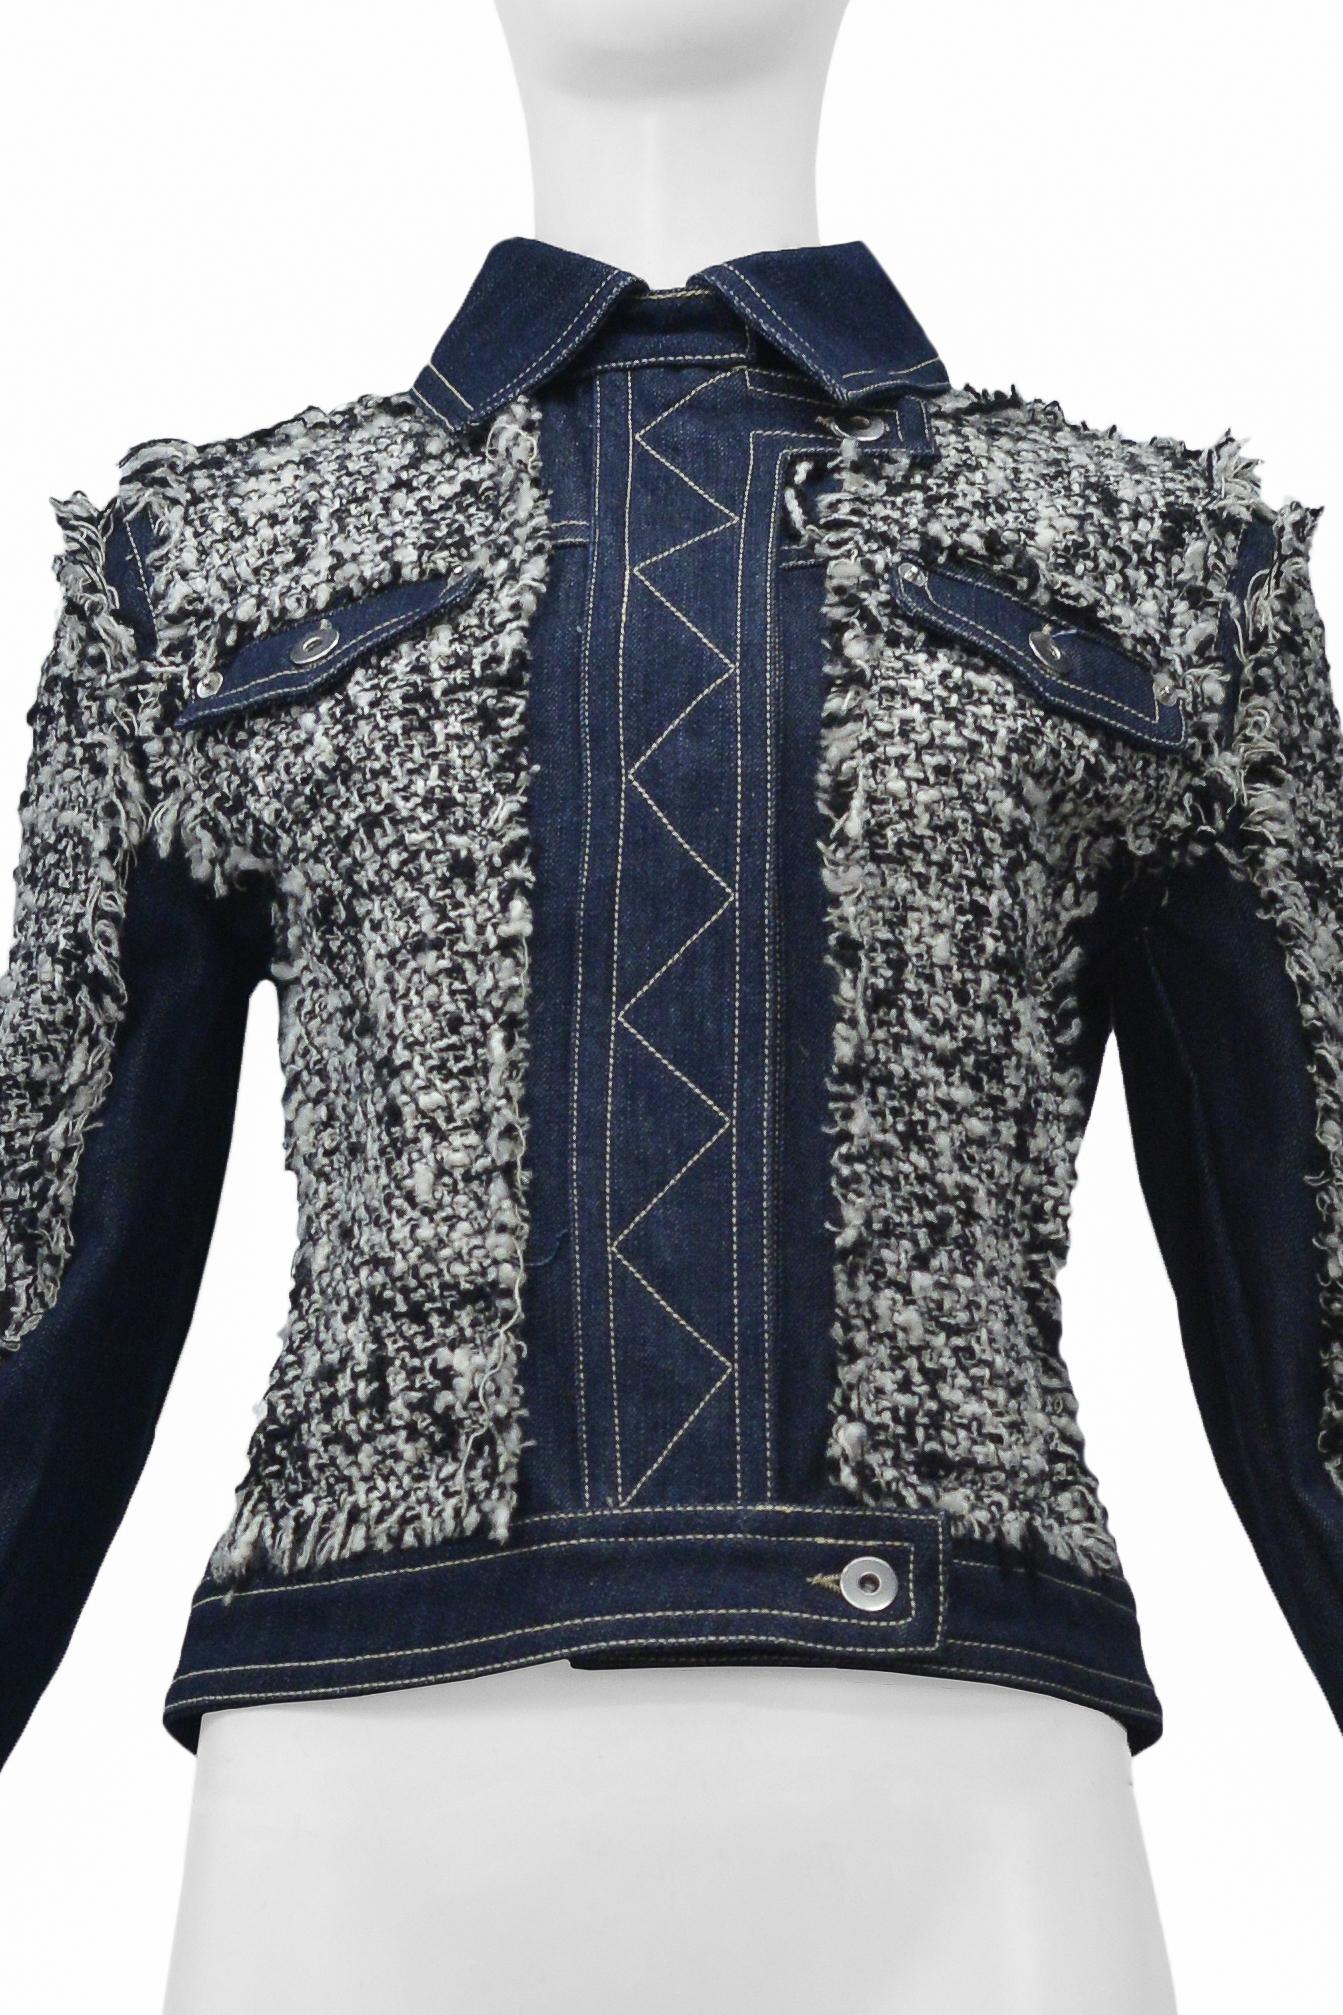 Gianfranco Ferre Denim & Boucle Jacket In Excellent Condition For Sale In Los Angeles, CA